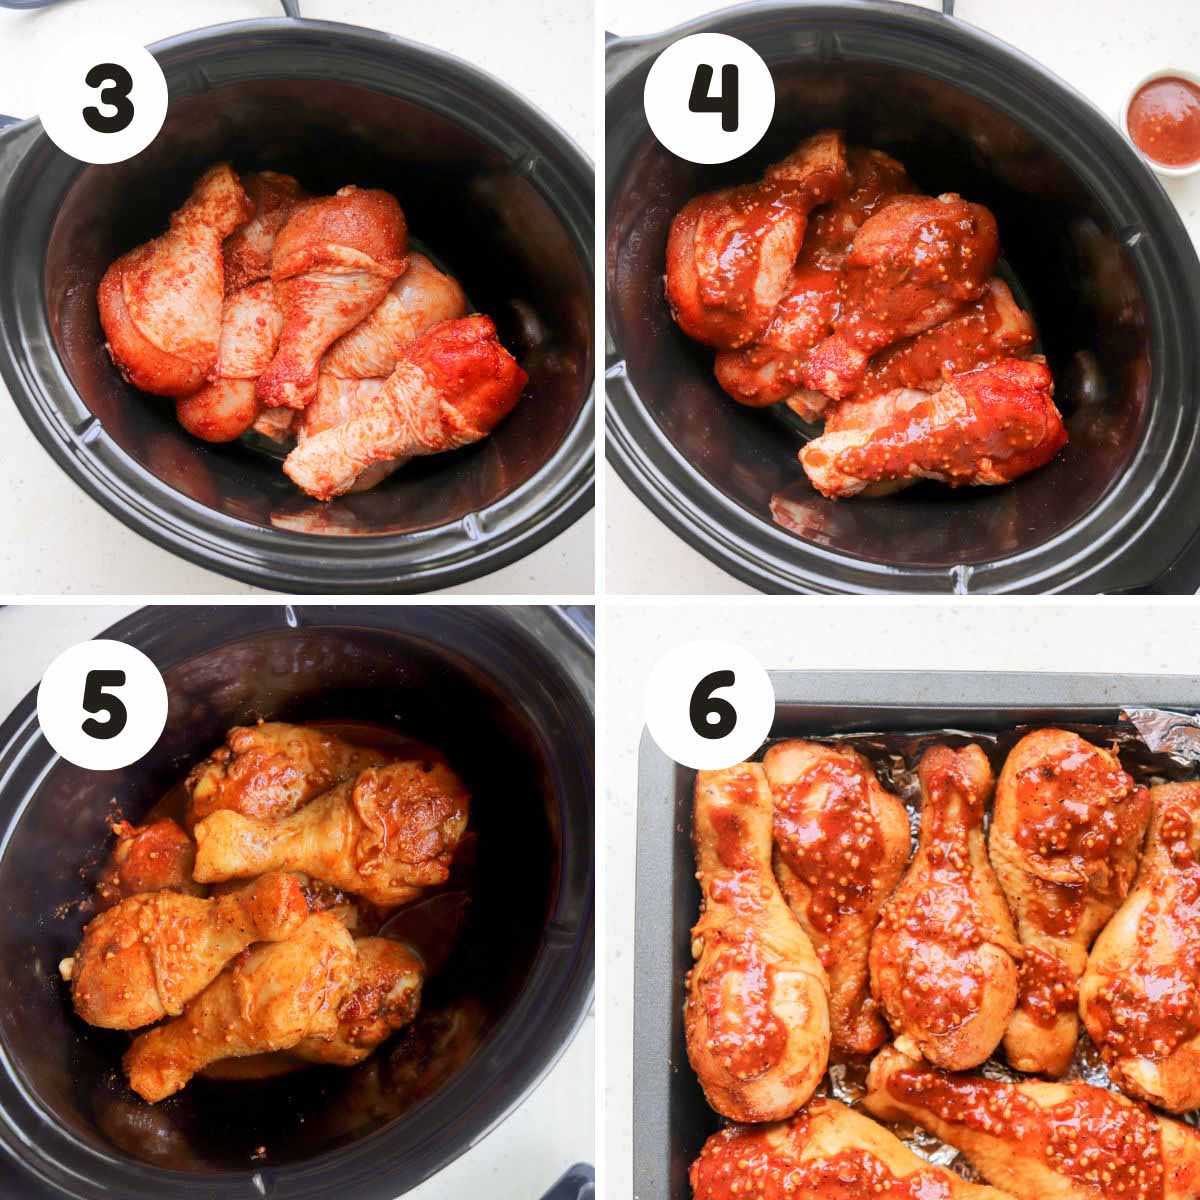 Steps to slow cook the drumsticks.